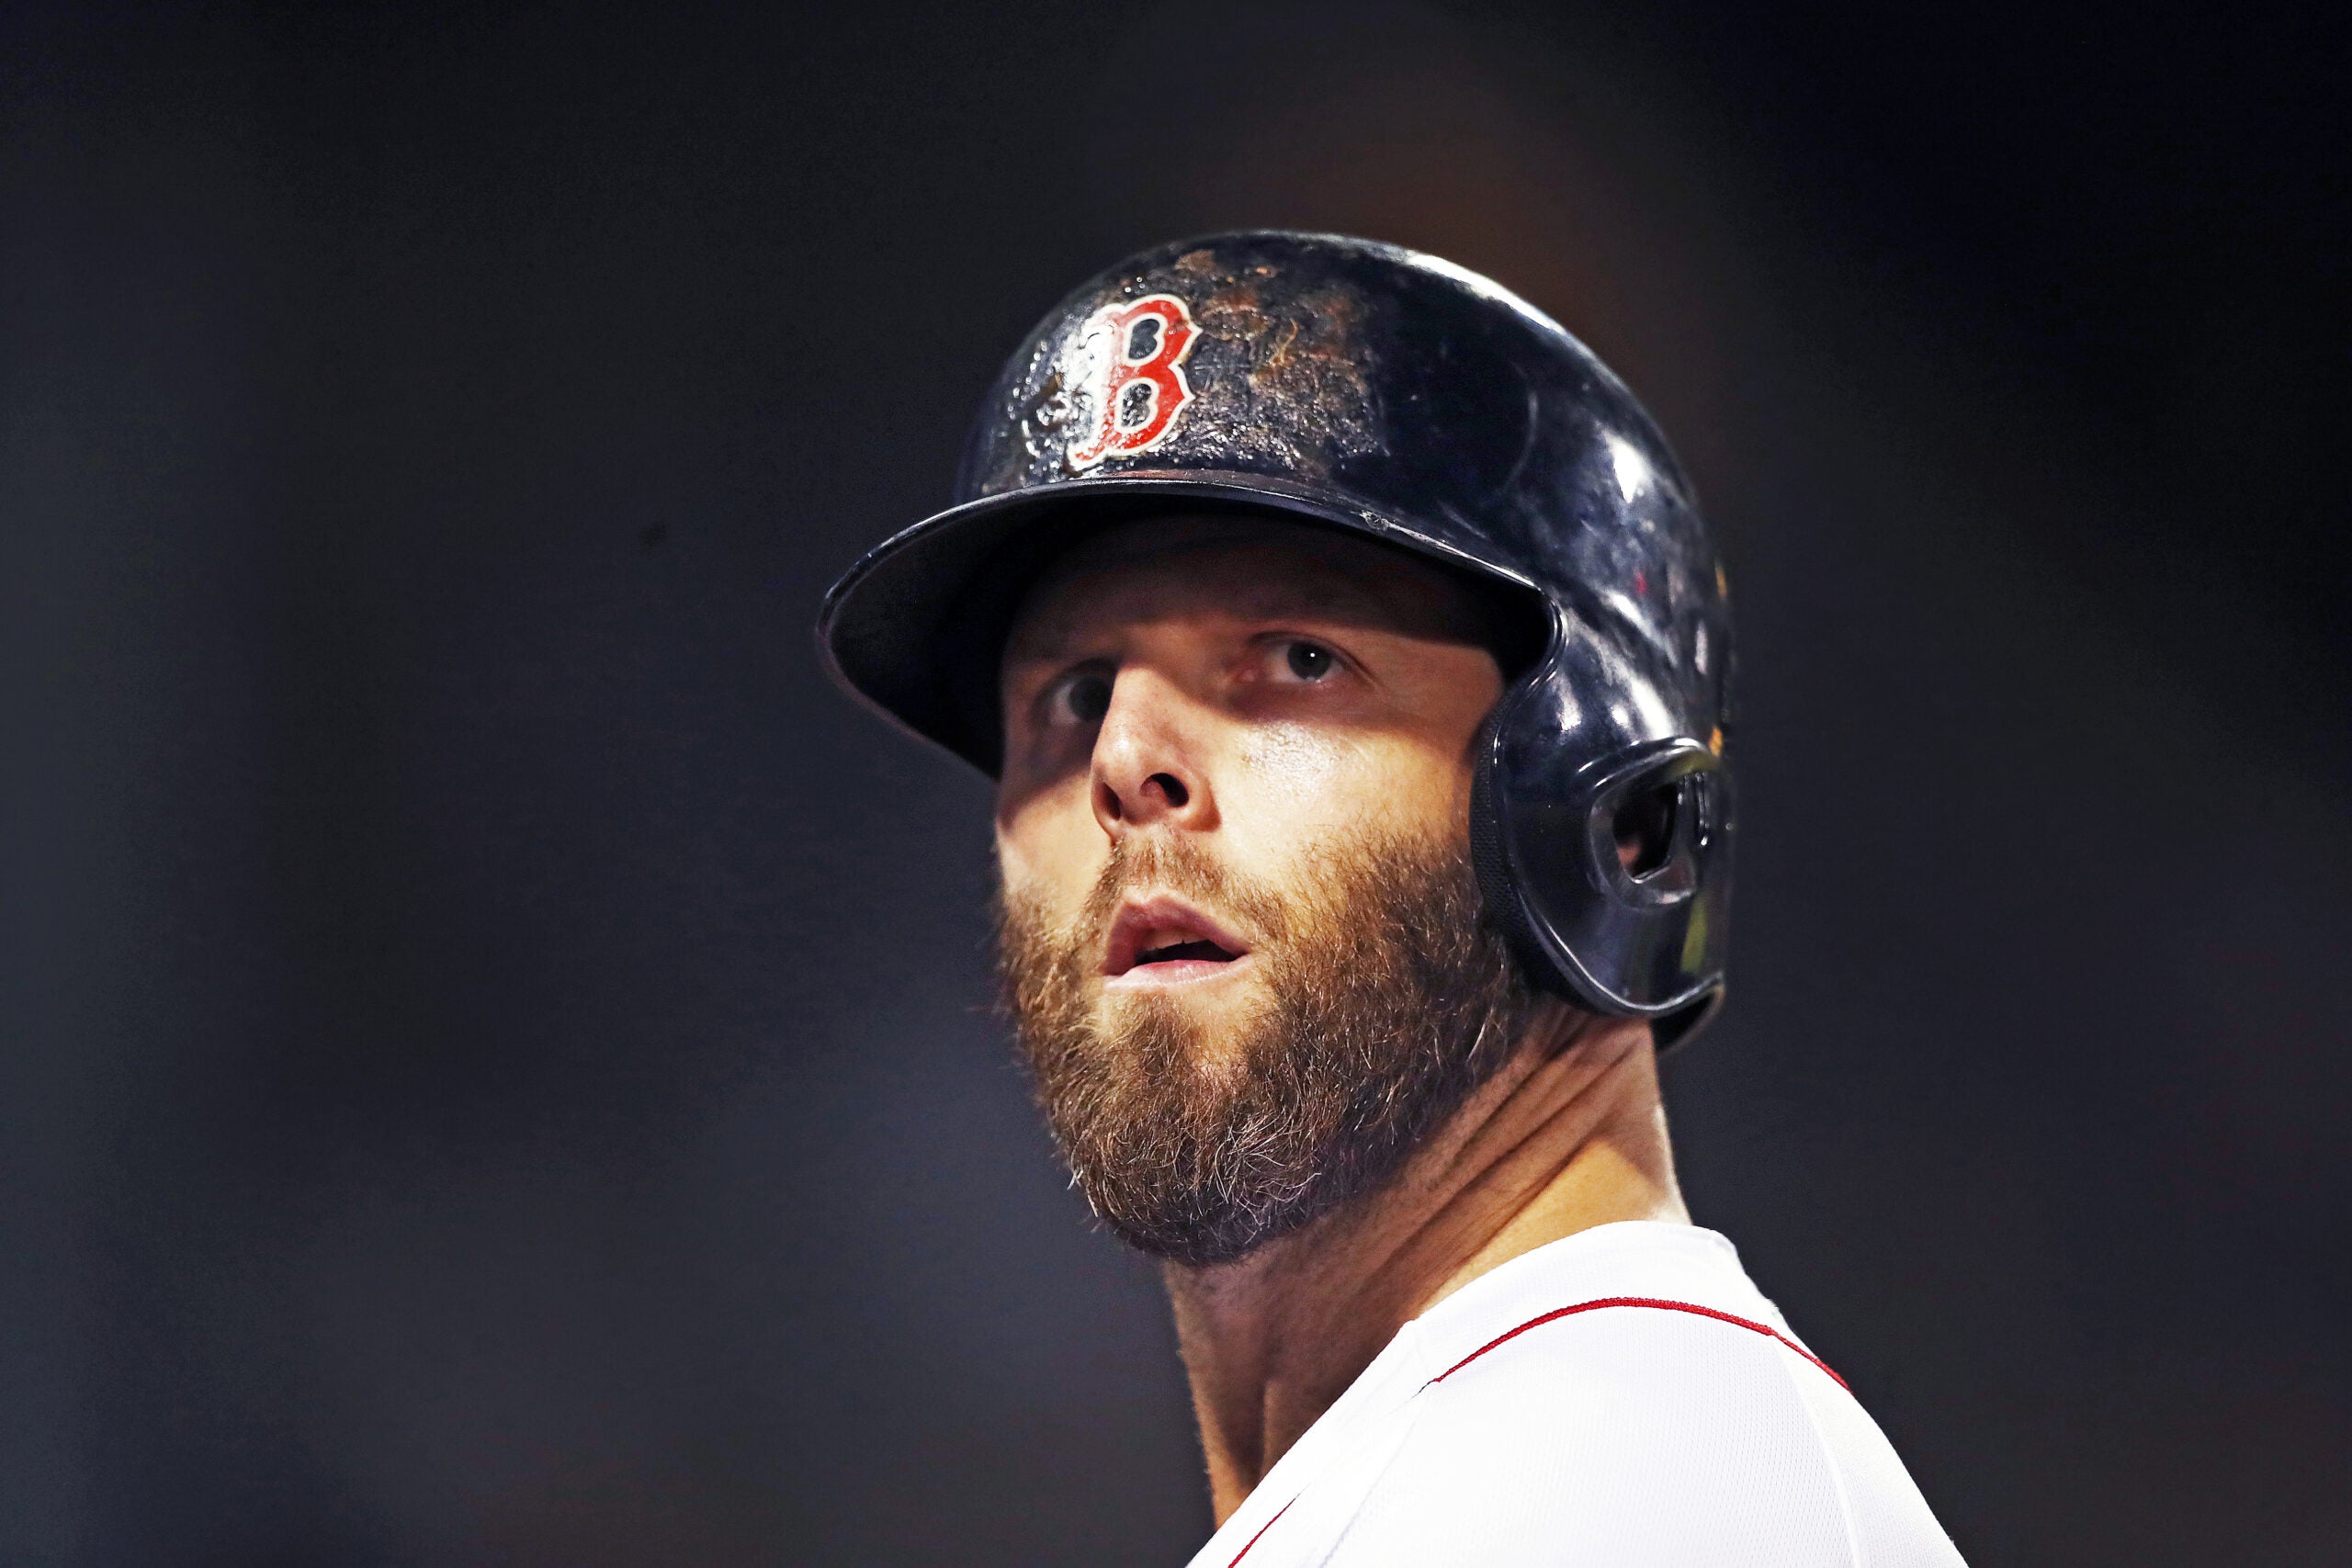 Dustin Pedroia has knee surgery, expected to be out seven months